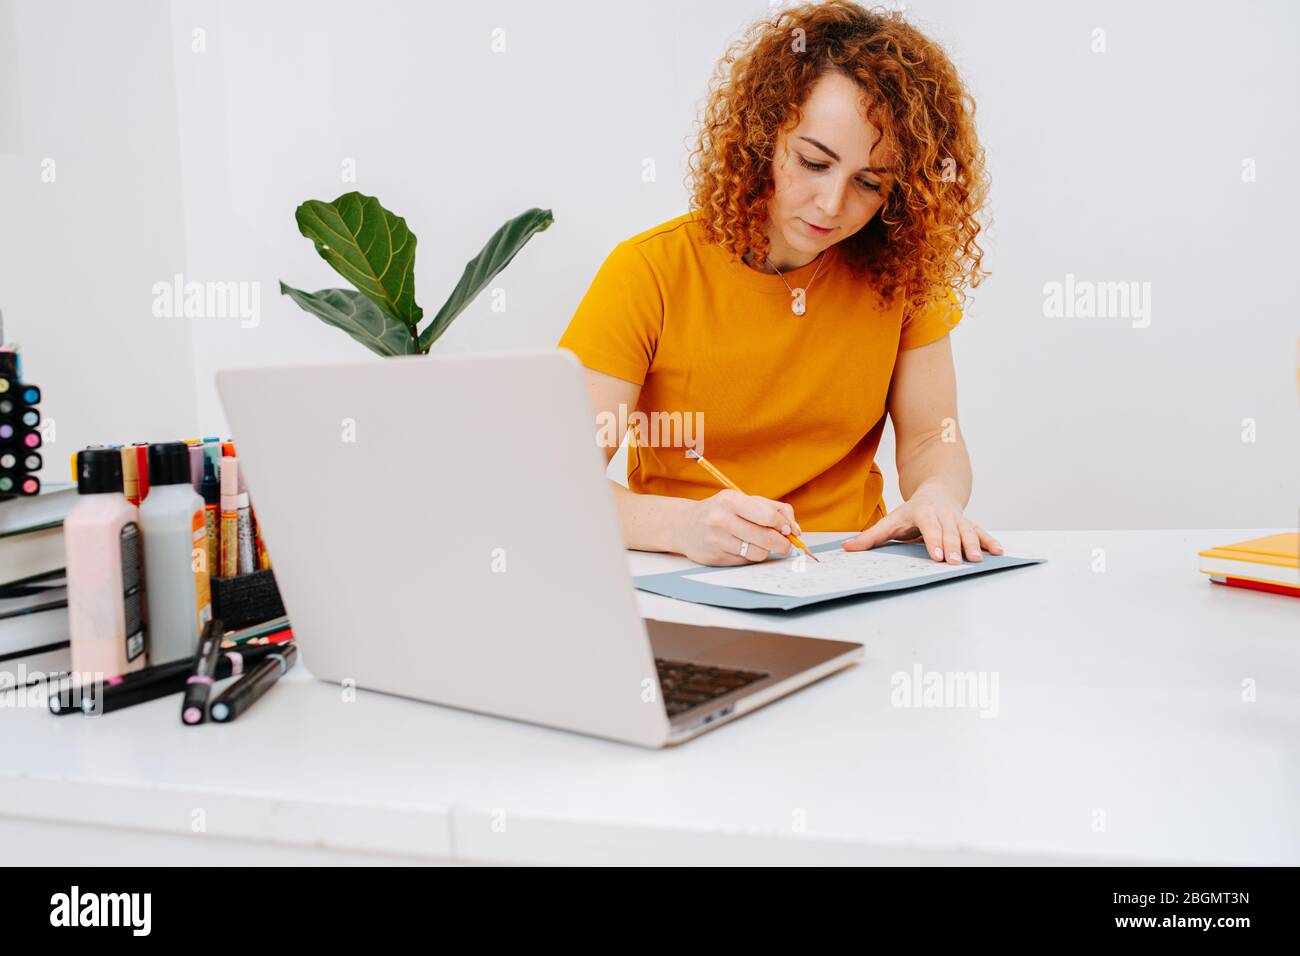 Serious artist woman drawing behind work desk, rushing it to catch up Stock Photo